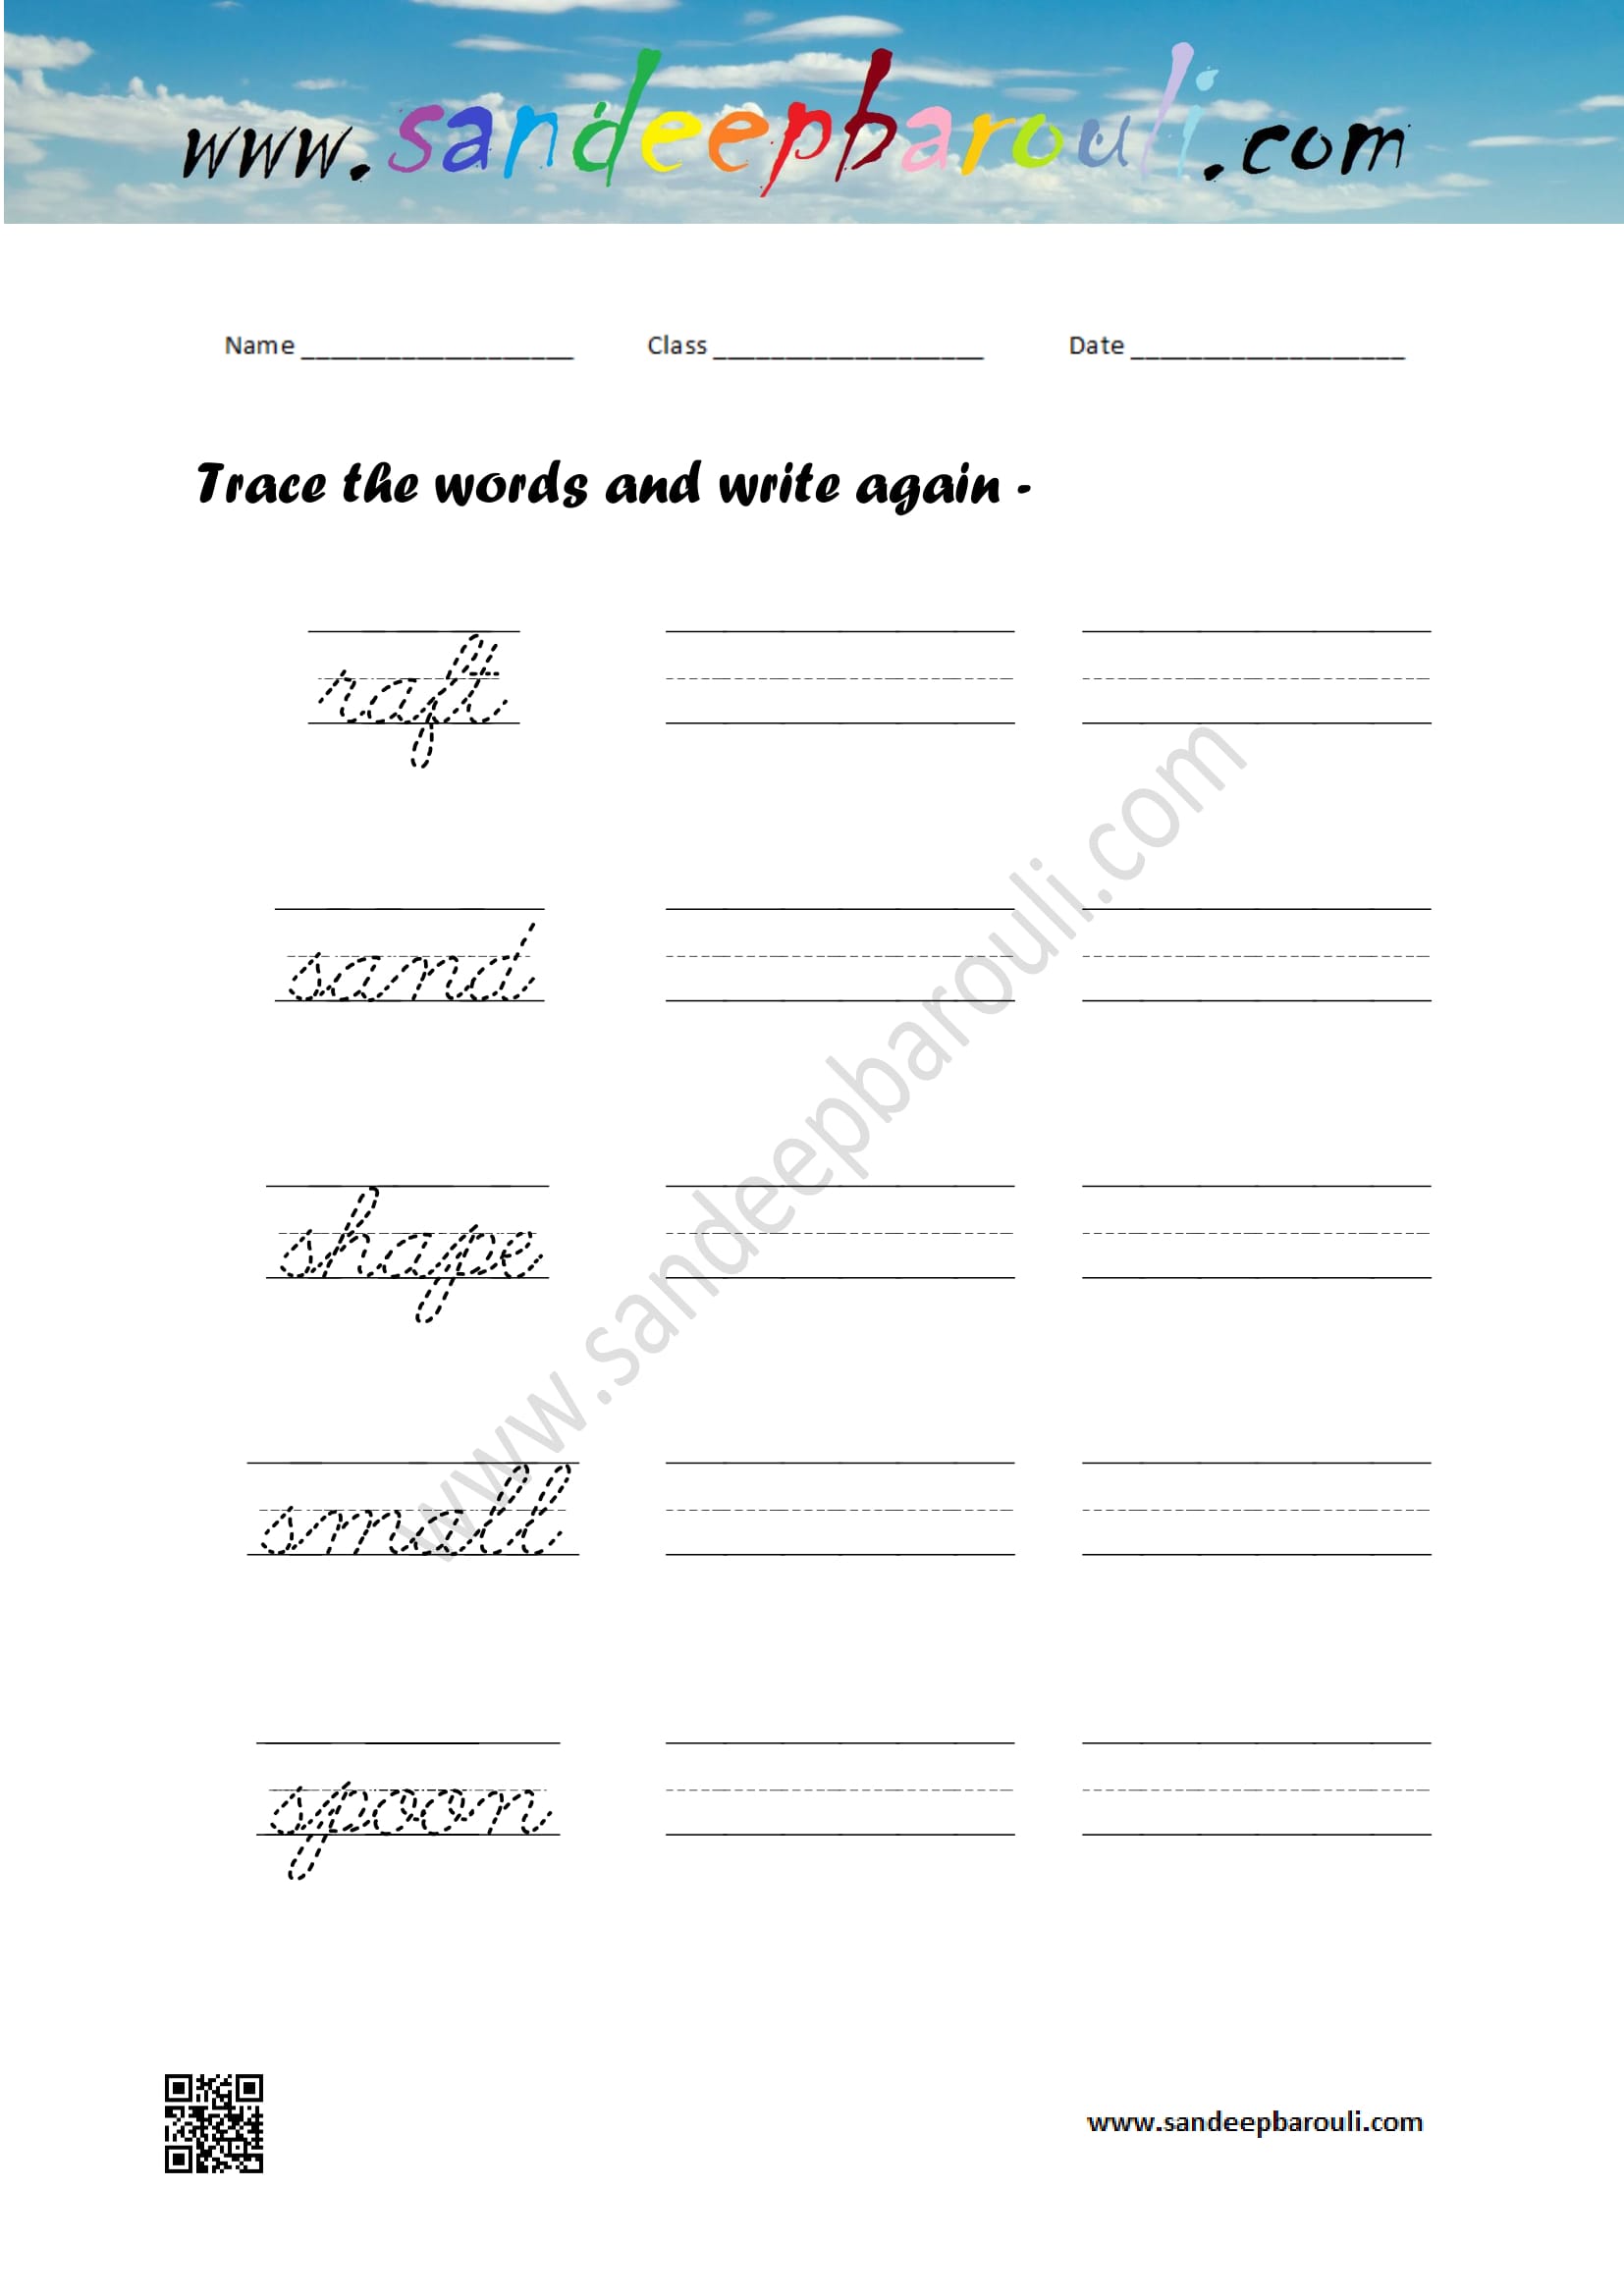 Cursive writing worksheet – trace the words and write again (83)